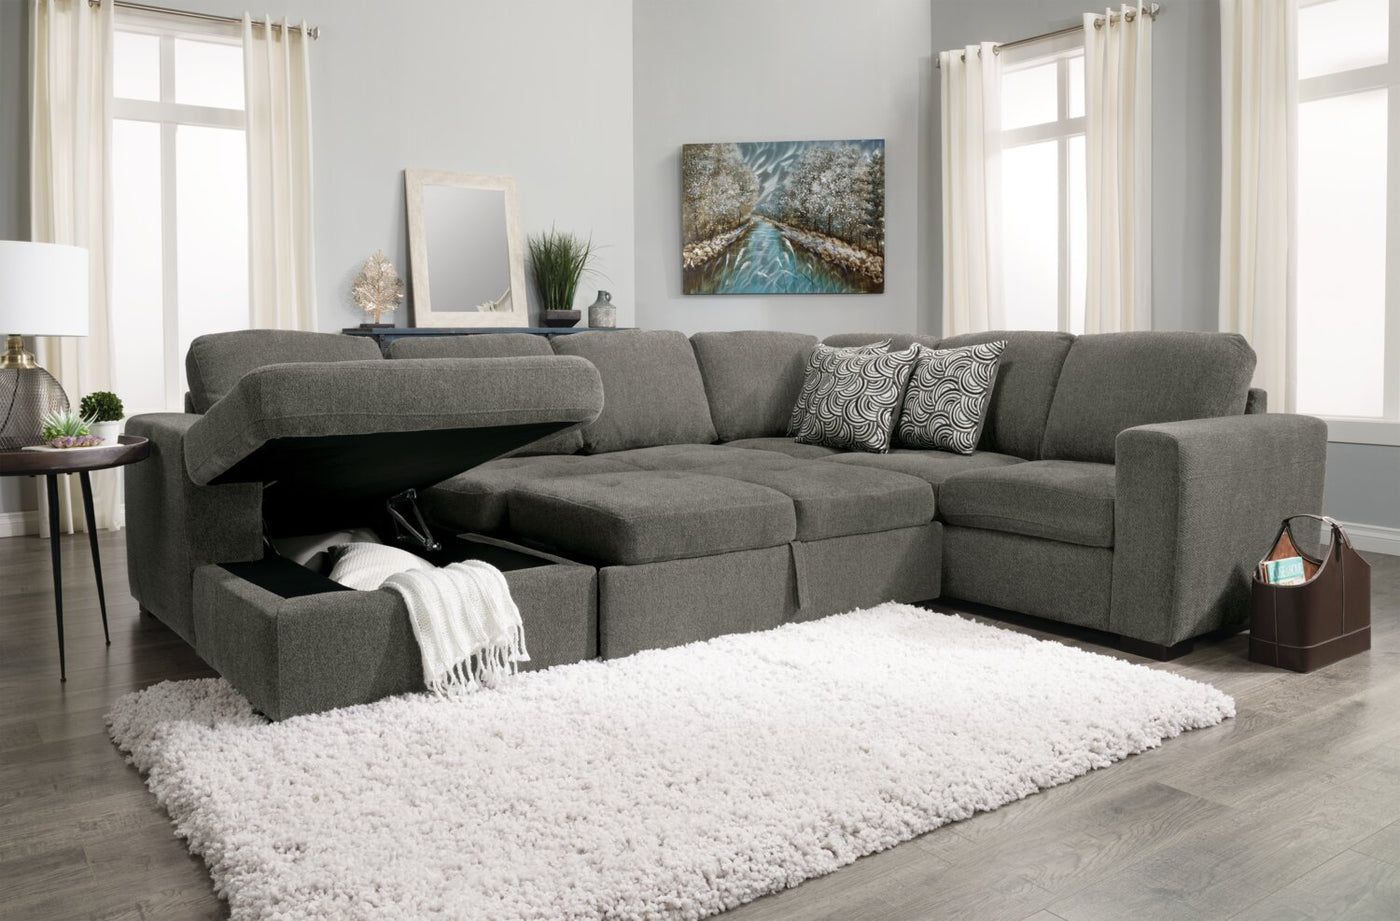 Izzy 4 Piece Chenille Sleeper Sectional With Left Facing Storage Ch For Left Or Right Facing Sleeper Sectionals (View 11 of 21)